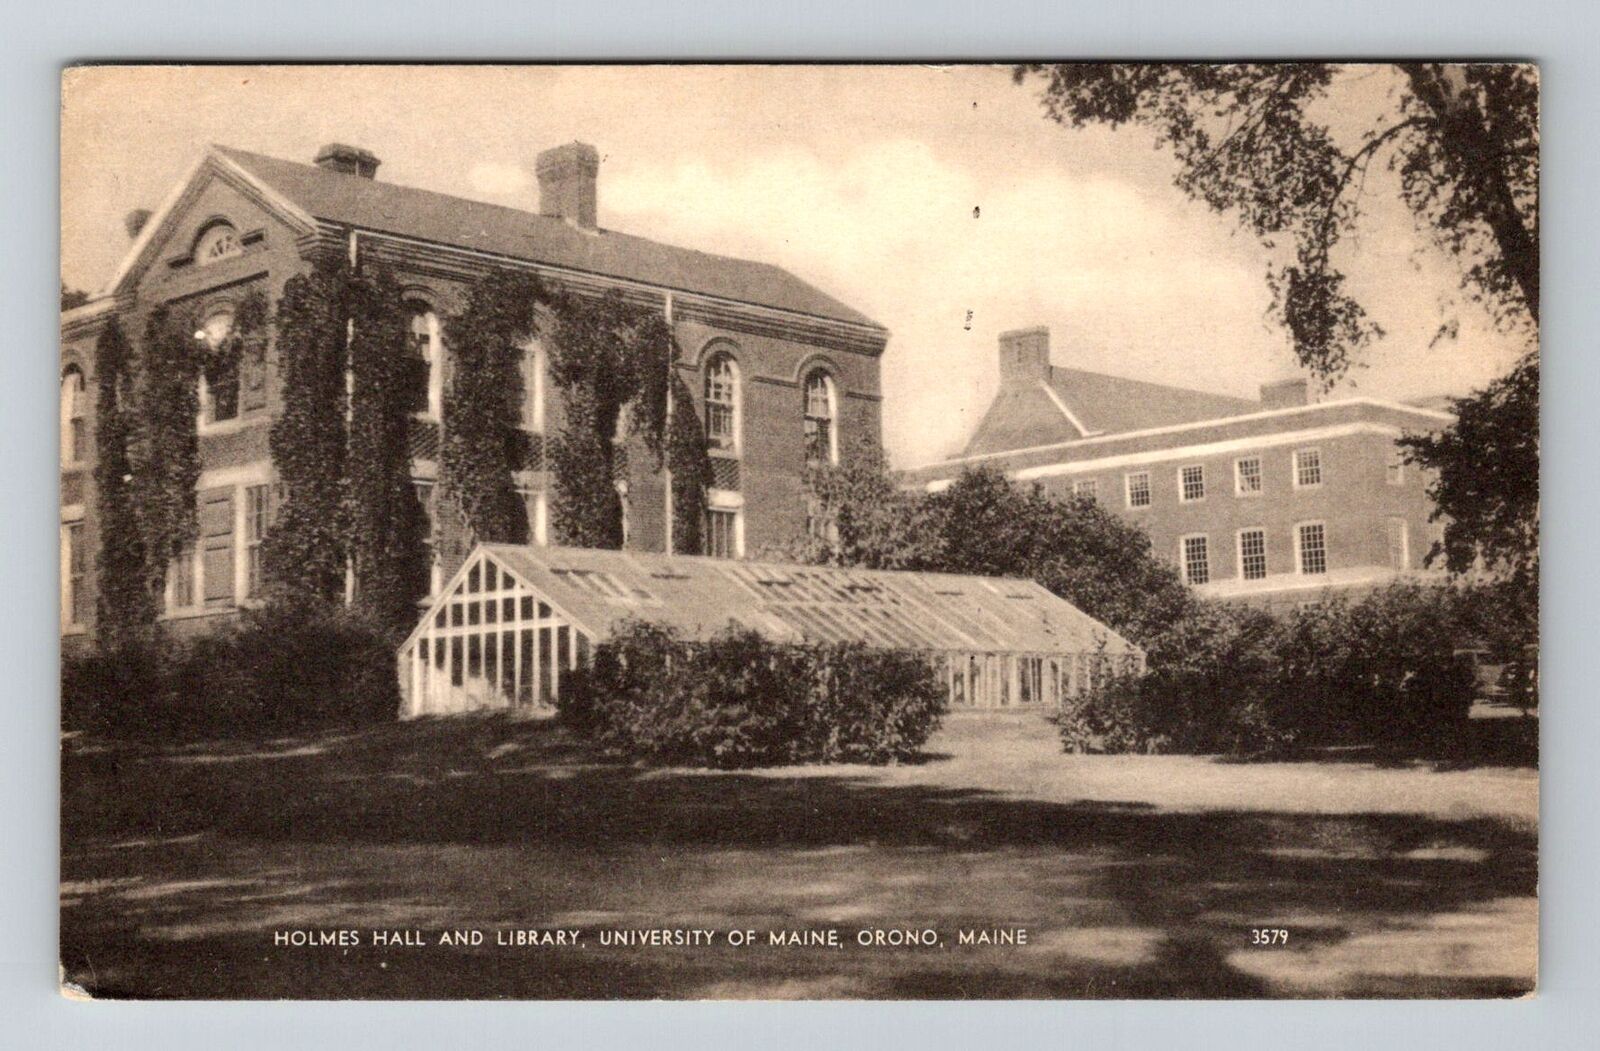 Orono ME-Maine, University of Maine, Holmes Hall and Library, Vintage Postcard